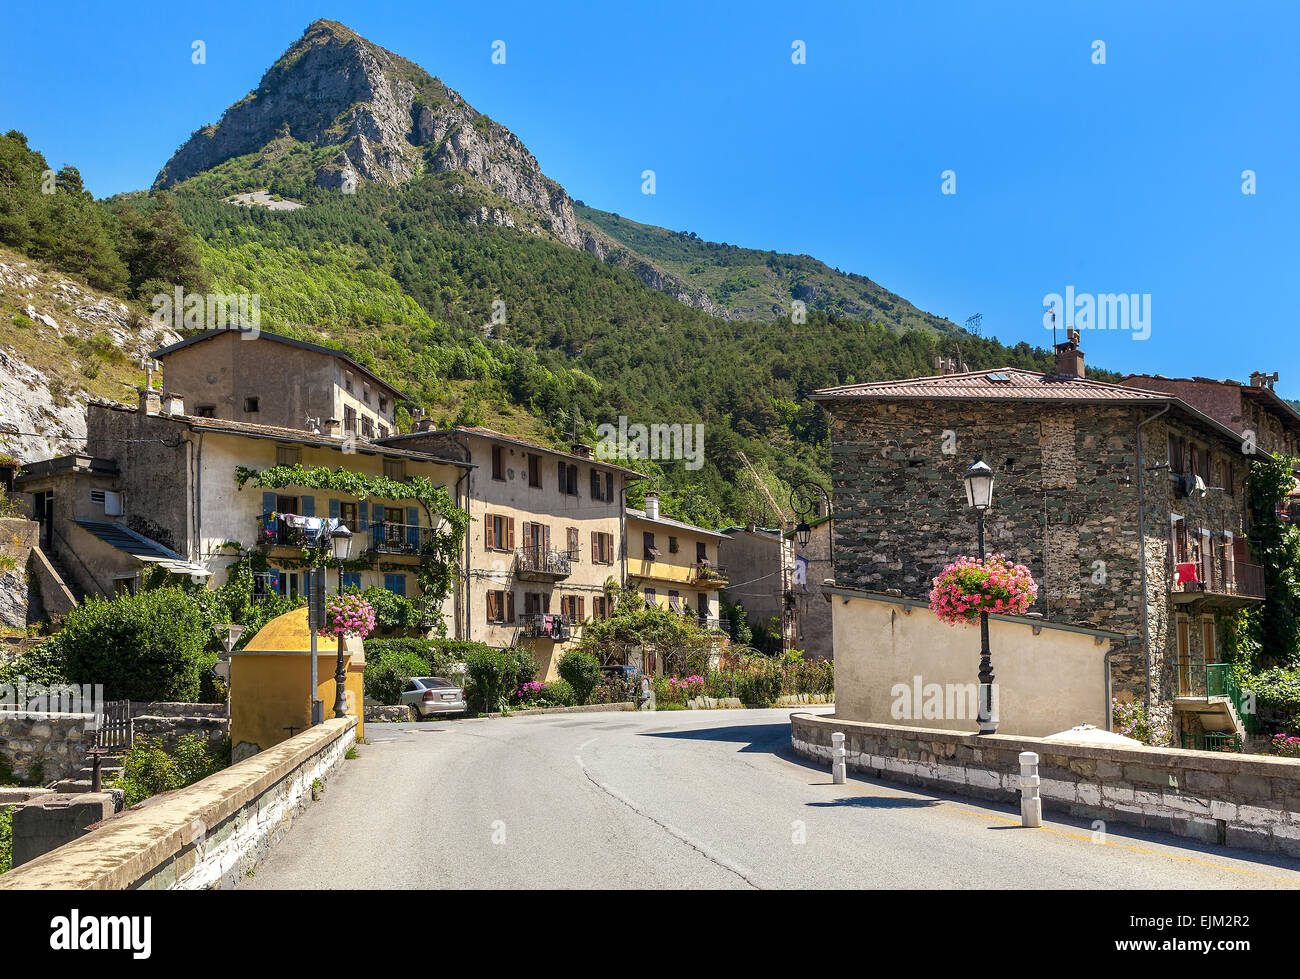 Road, rural houses and mountain on background under blue sky in small town of Tende, France. Stock Photo